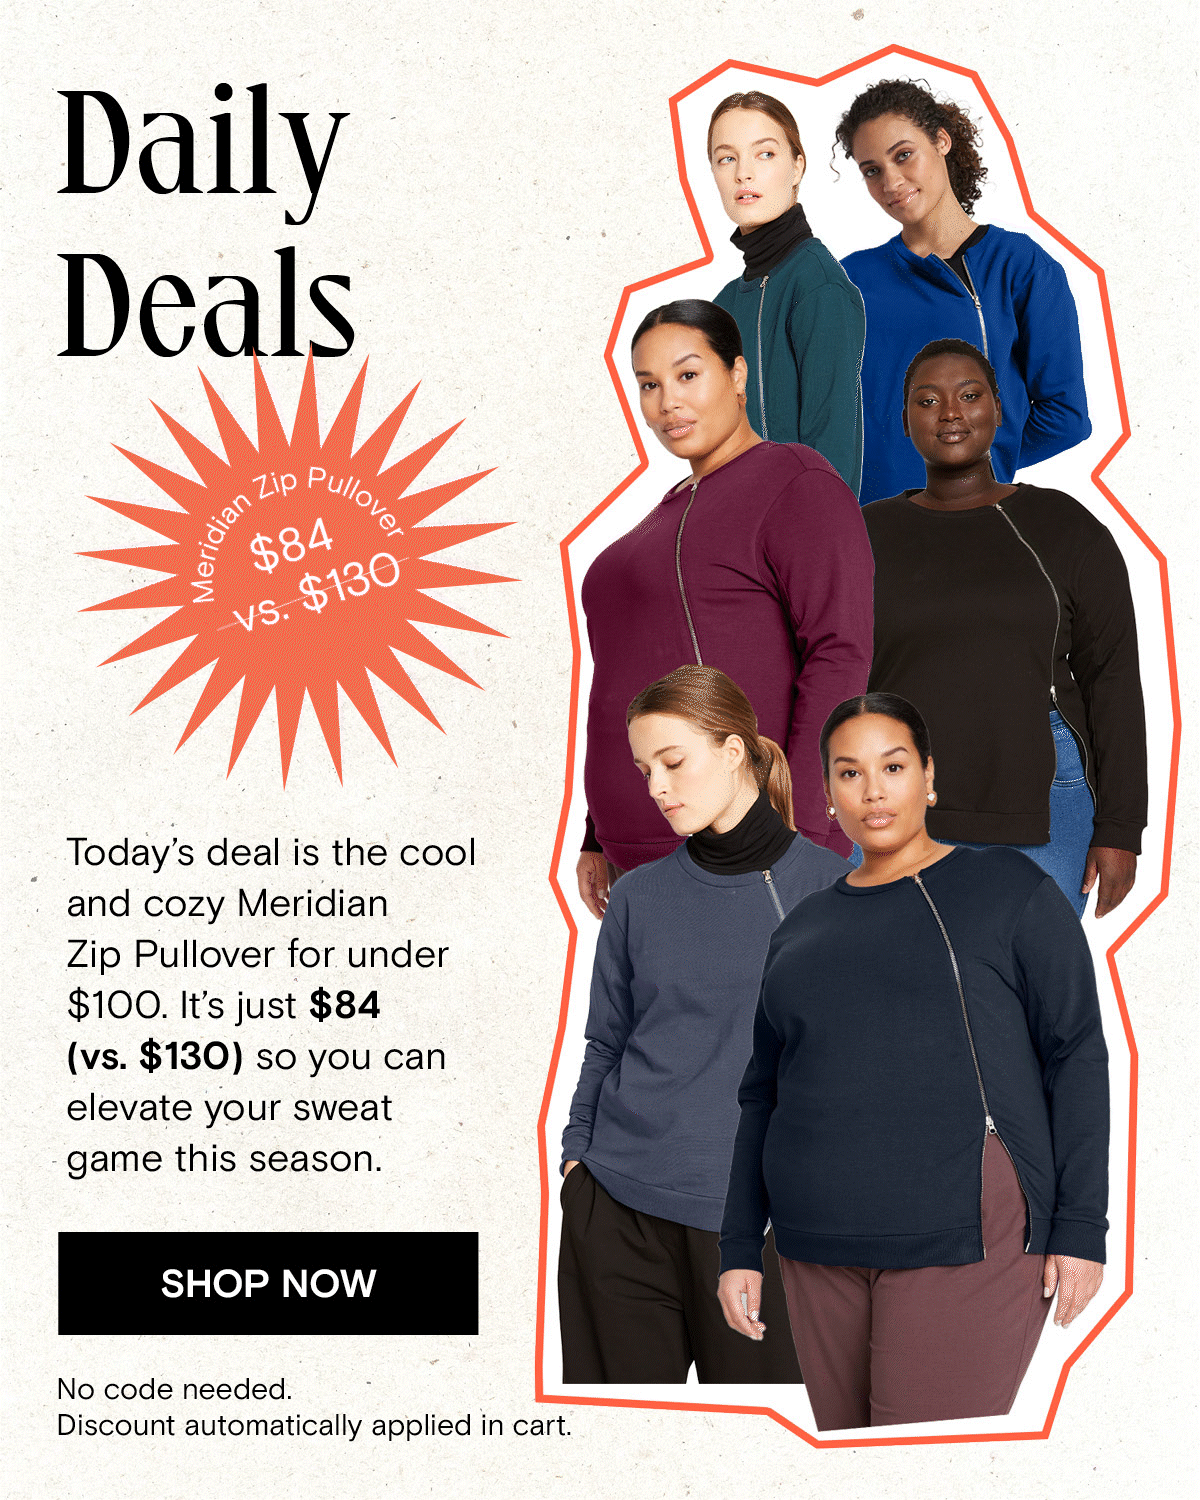 Get our Meridian Zip Pullover for $84